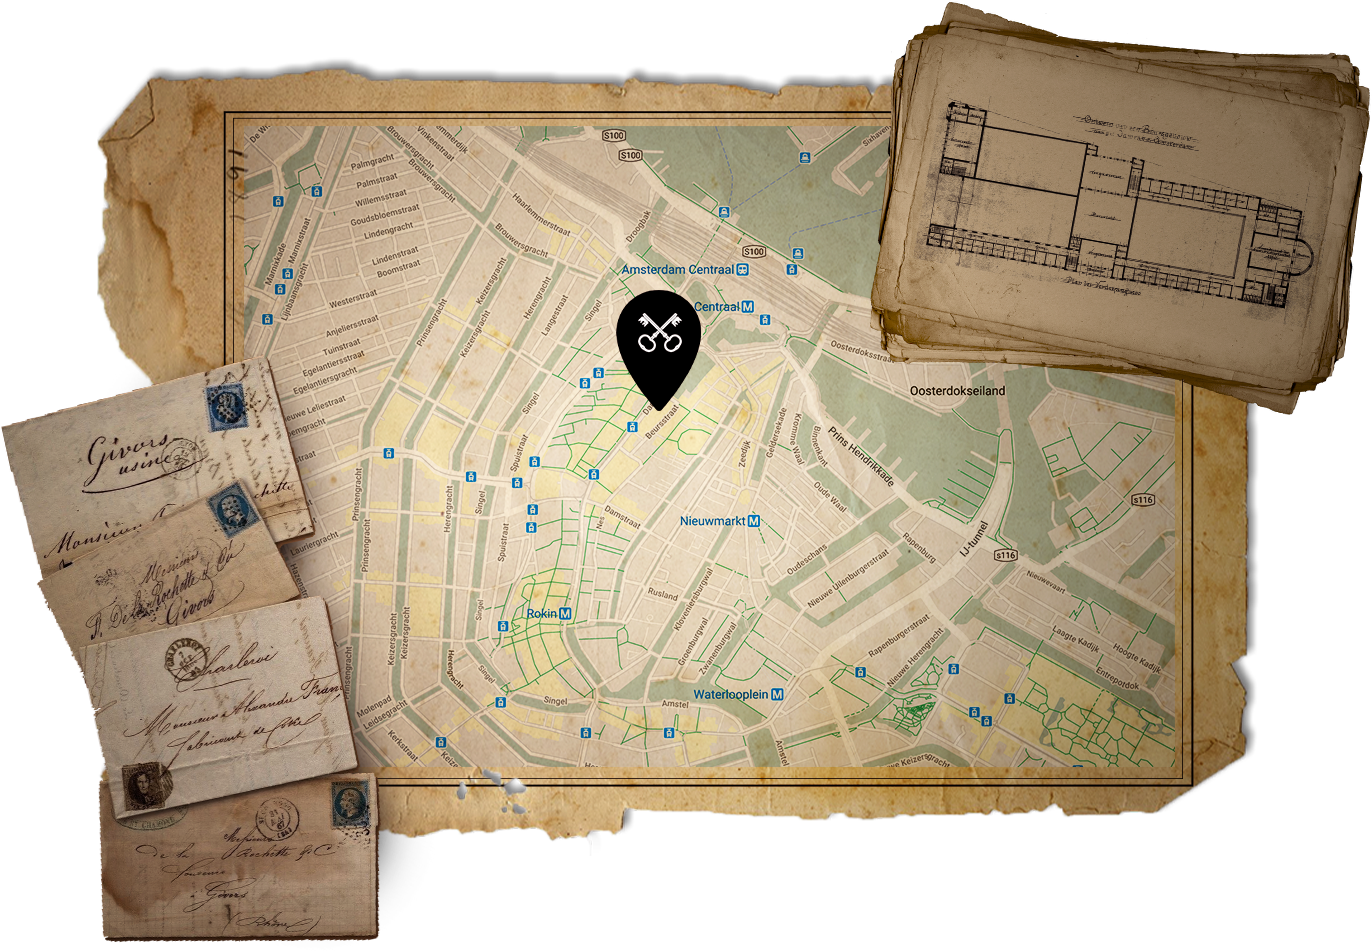 Map to Sherlocked's location at the beurs van berlage